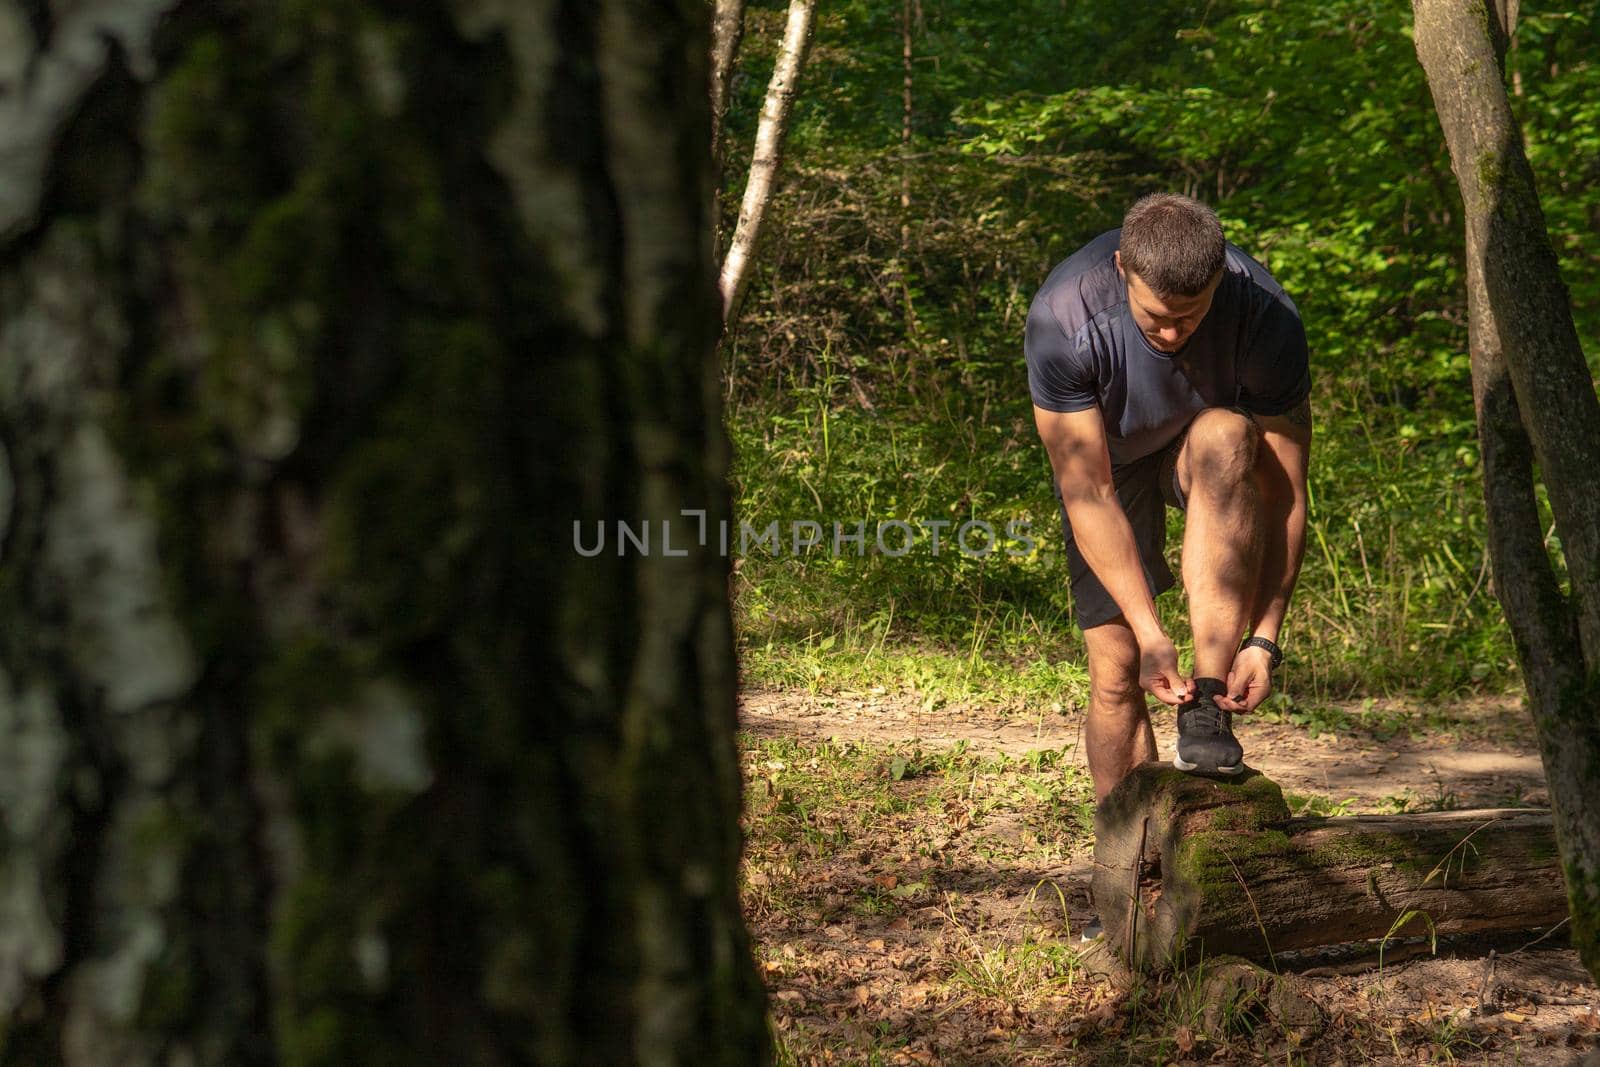 The sportsman is tying the laces of his legs in sneakers close up the athlete runs in the park outdoors, around the forest, oak trees green grass young enduring athletic athlete active athlete nature, fitness trail endurance wellness marathon, woods man. body cross, runners stretches